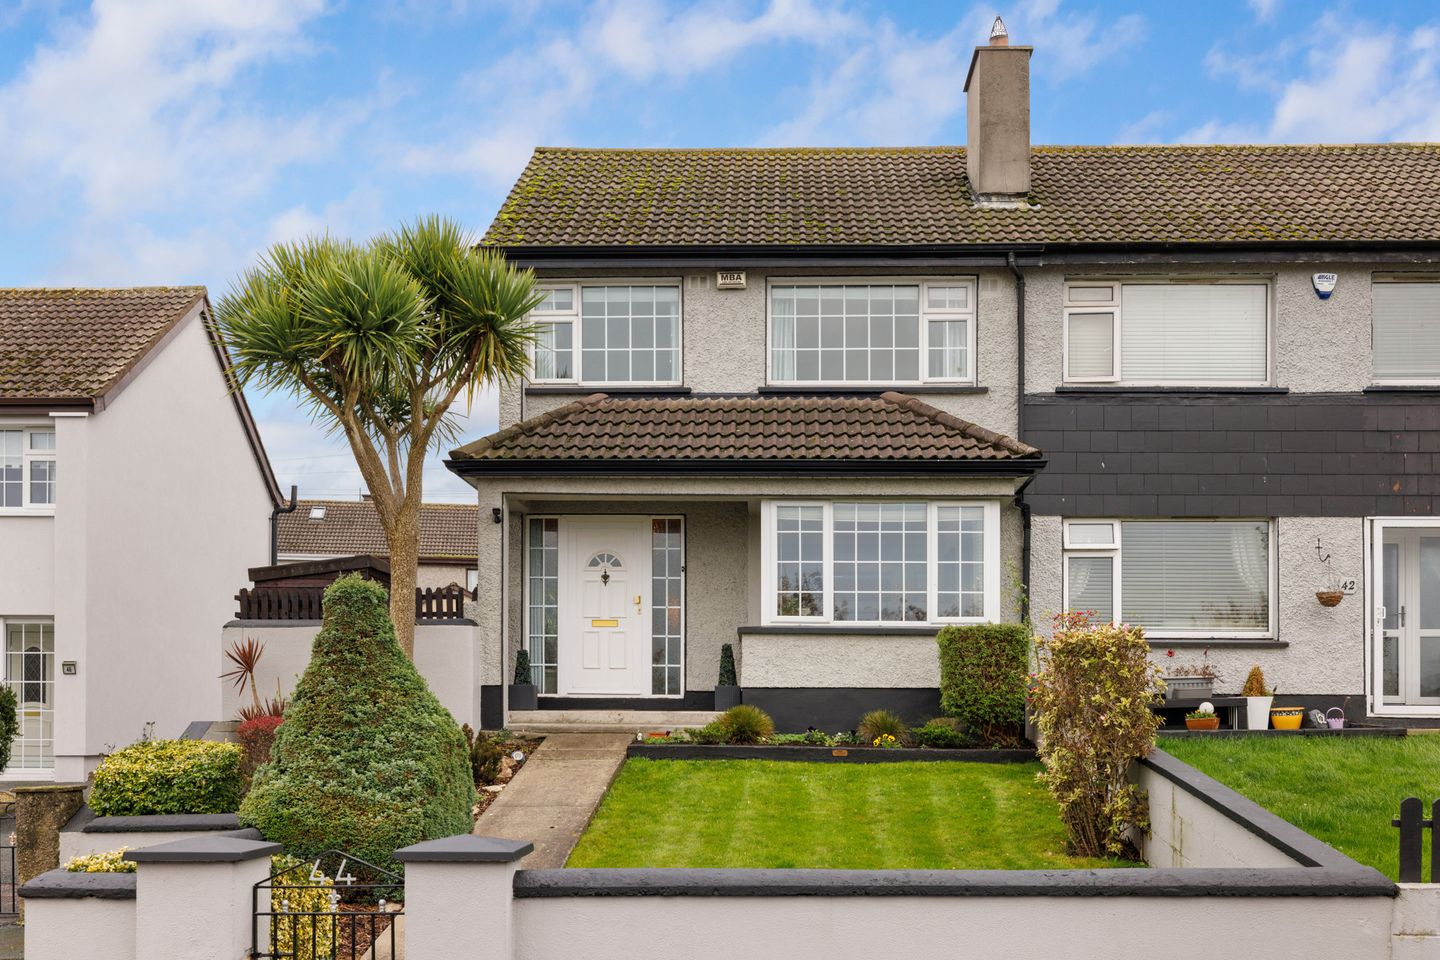 44 Seaview Heights, Rathnew, Co. Wicklow